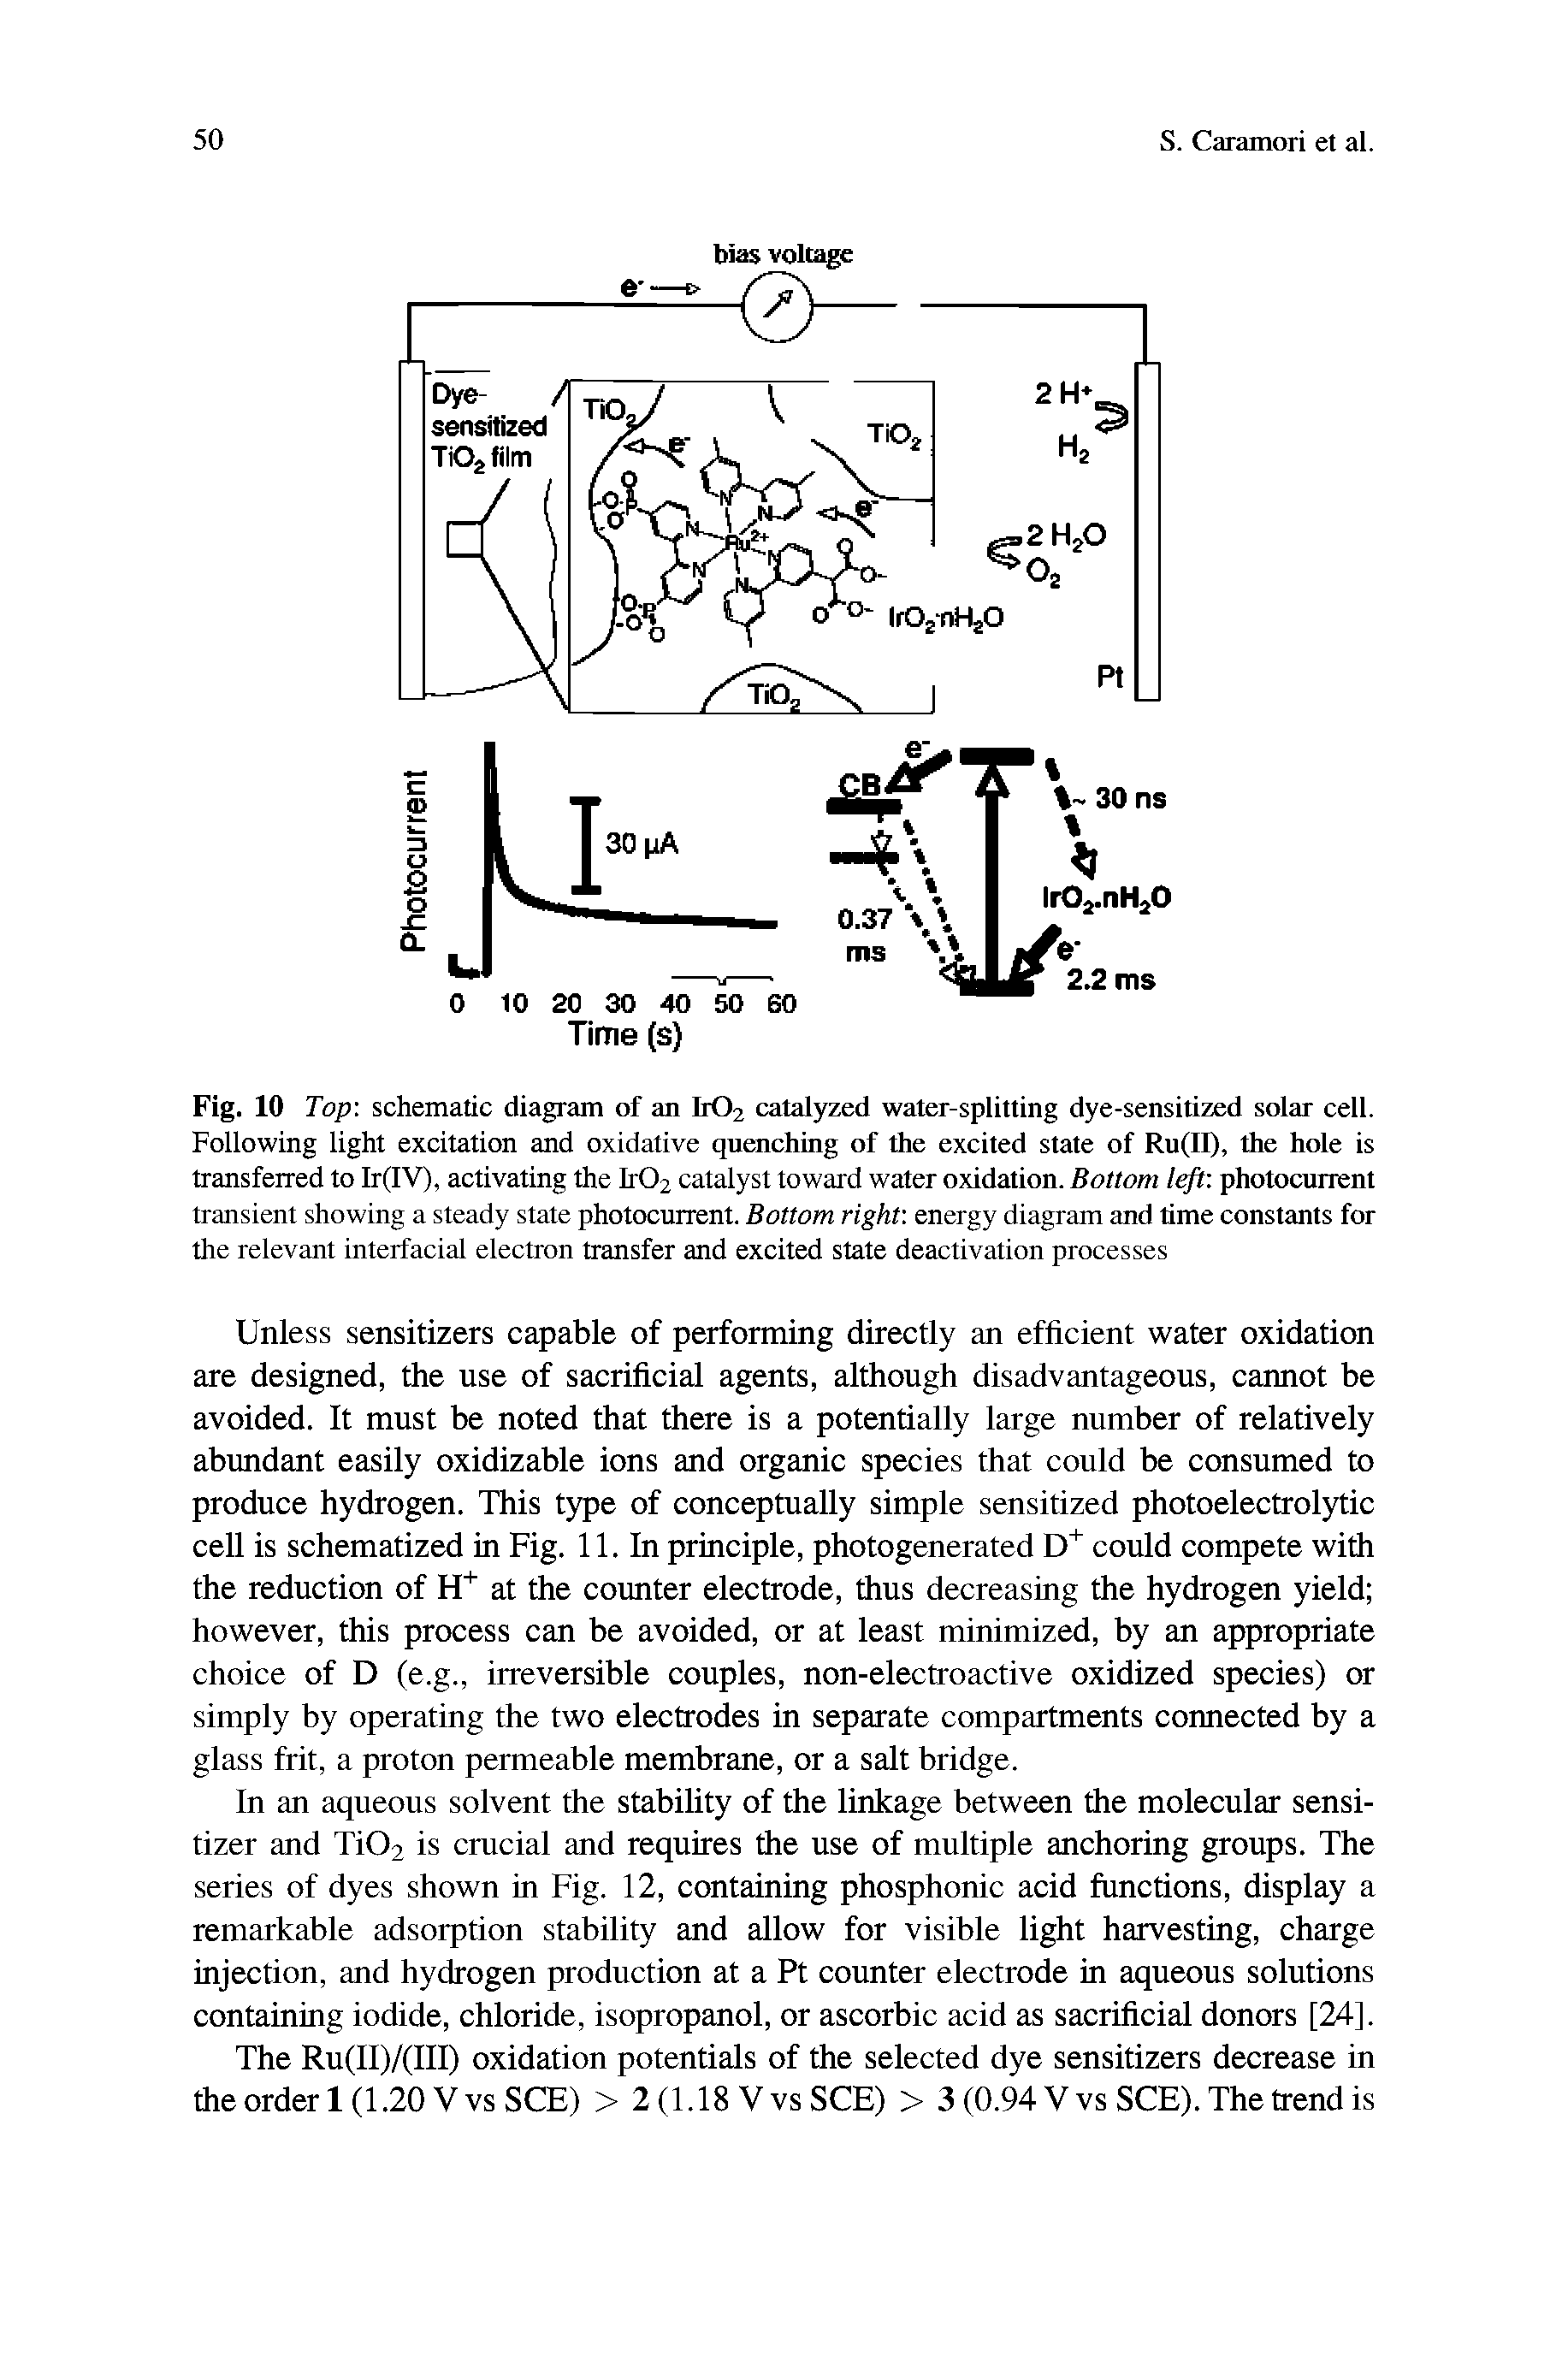 Fig. 10 Top schematic diagram of an I1O2 catalyzed water-splitting dye-sensitized solar cell. Following light excitation and oxidative quenching of the excited state of Ru(II), the hole is transferred to Ir(IV), activating the Ir02 catalyst toward water oxidation. Bottom left photocurrent...